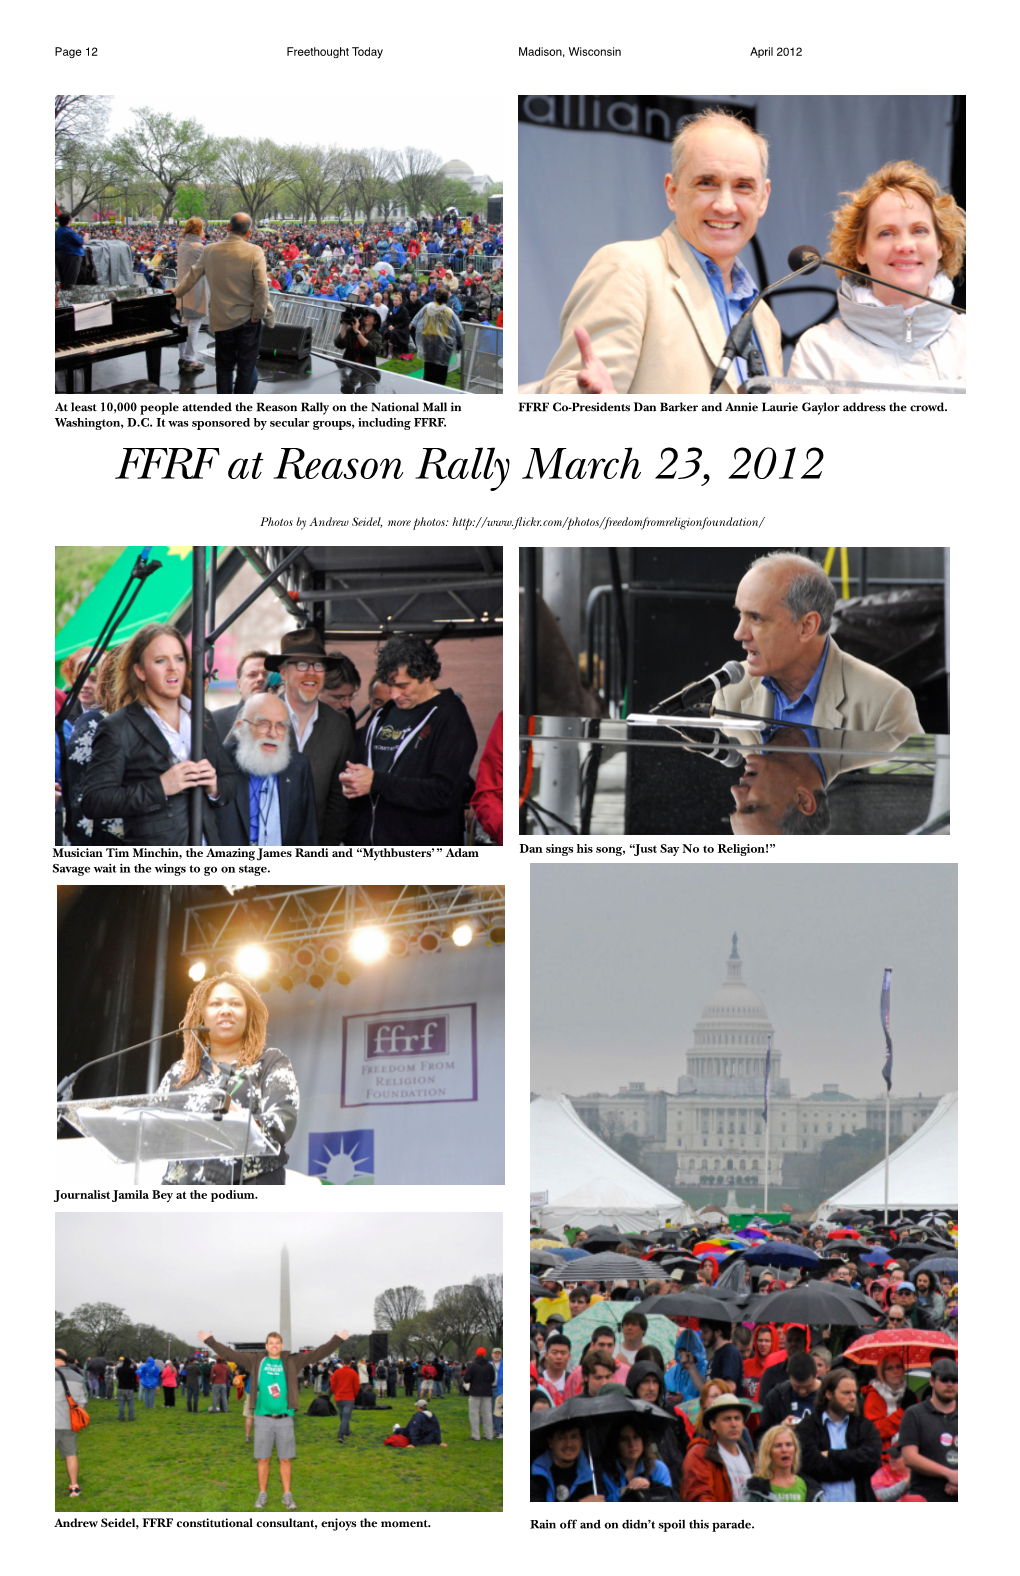 FFRF at Reason Rally March 23, 2012